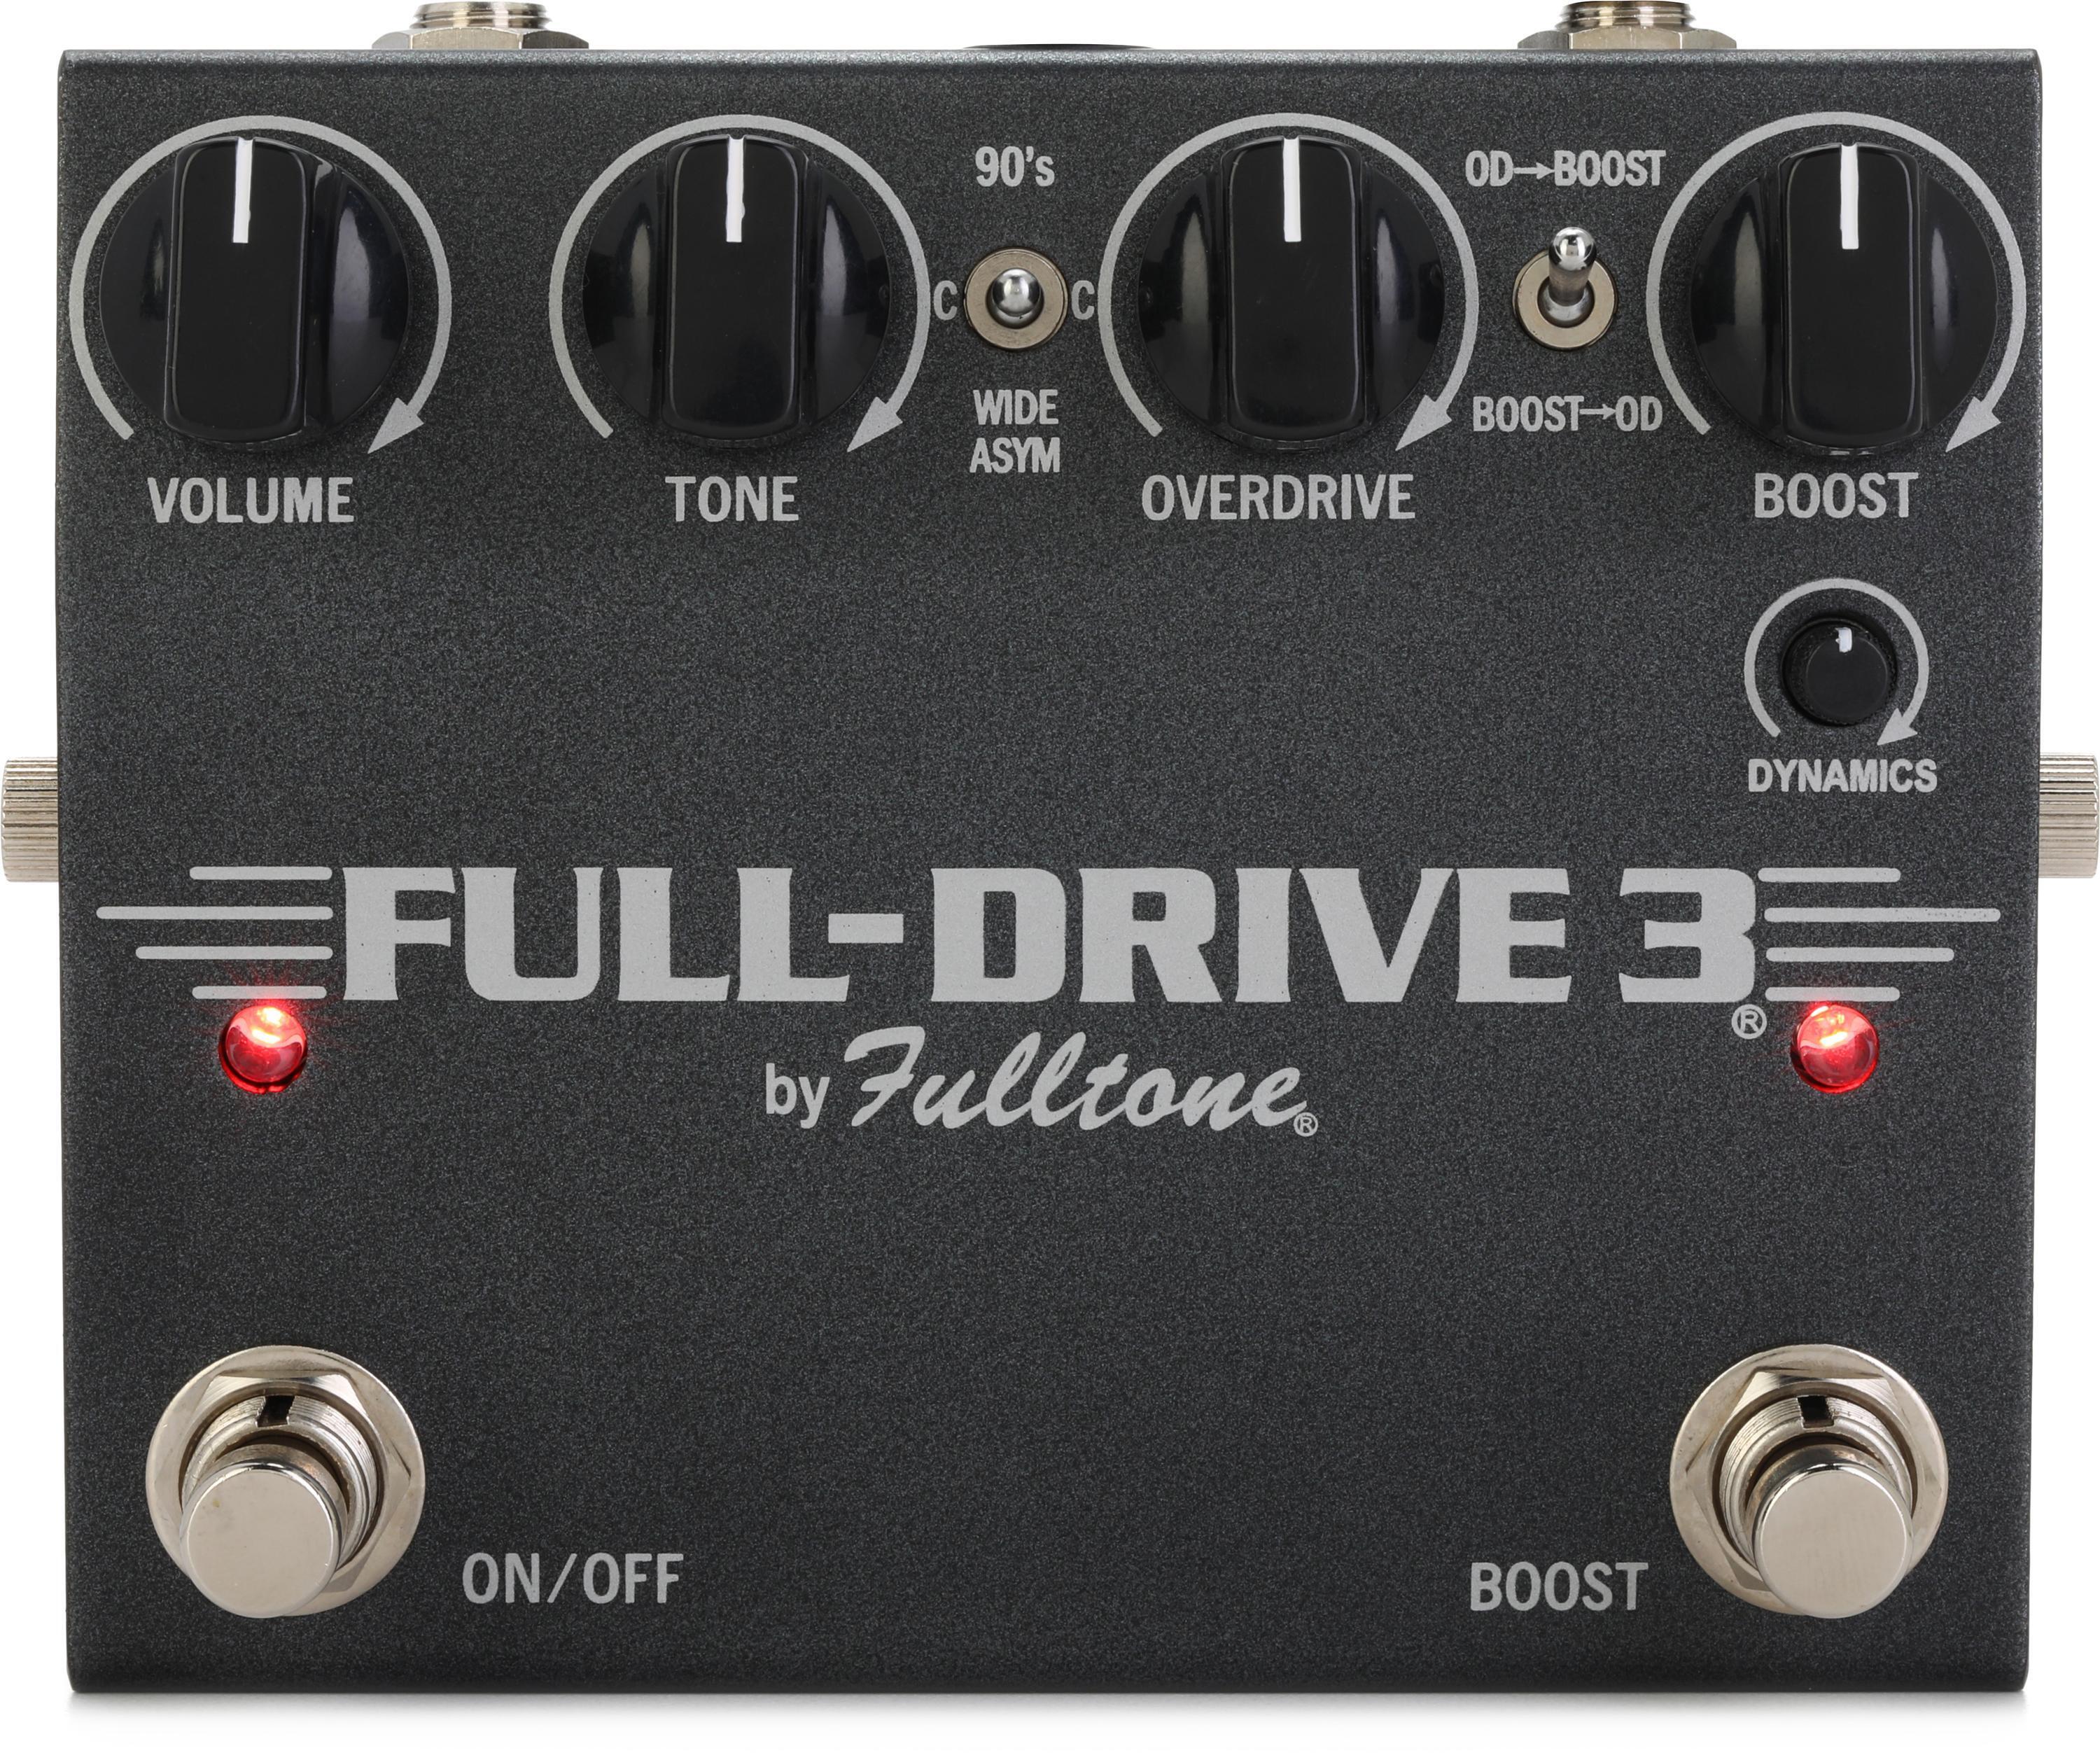 Fulltone Fulldrive 3 Overdrive / Boost Pedal | Sweetwater